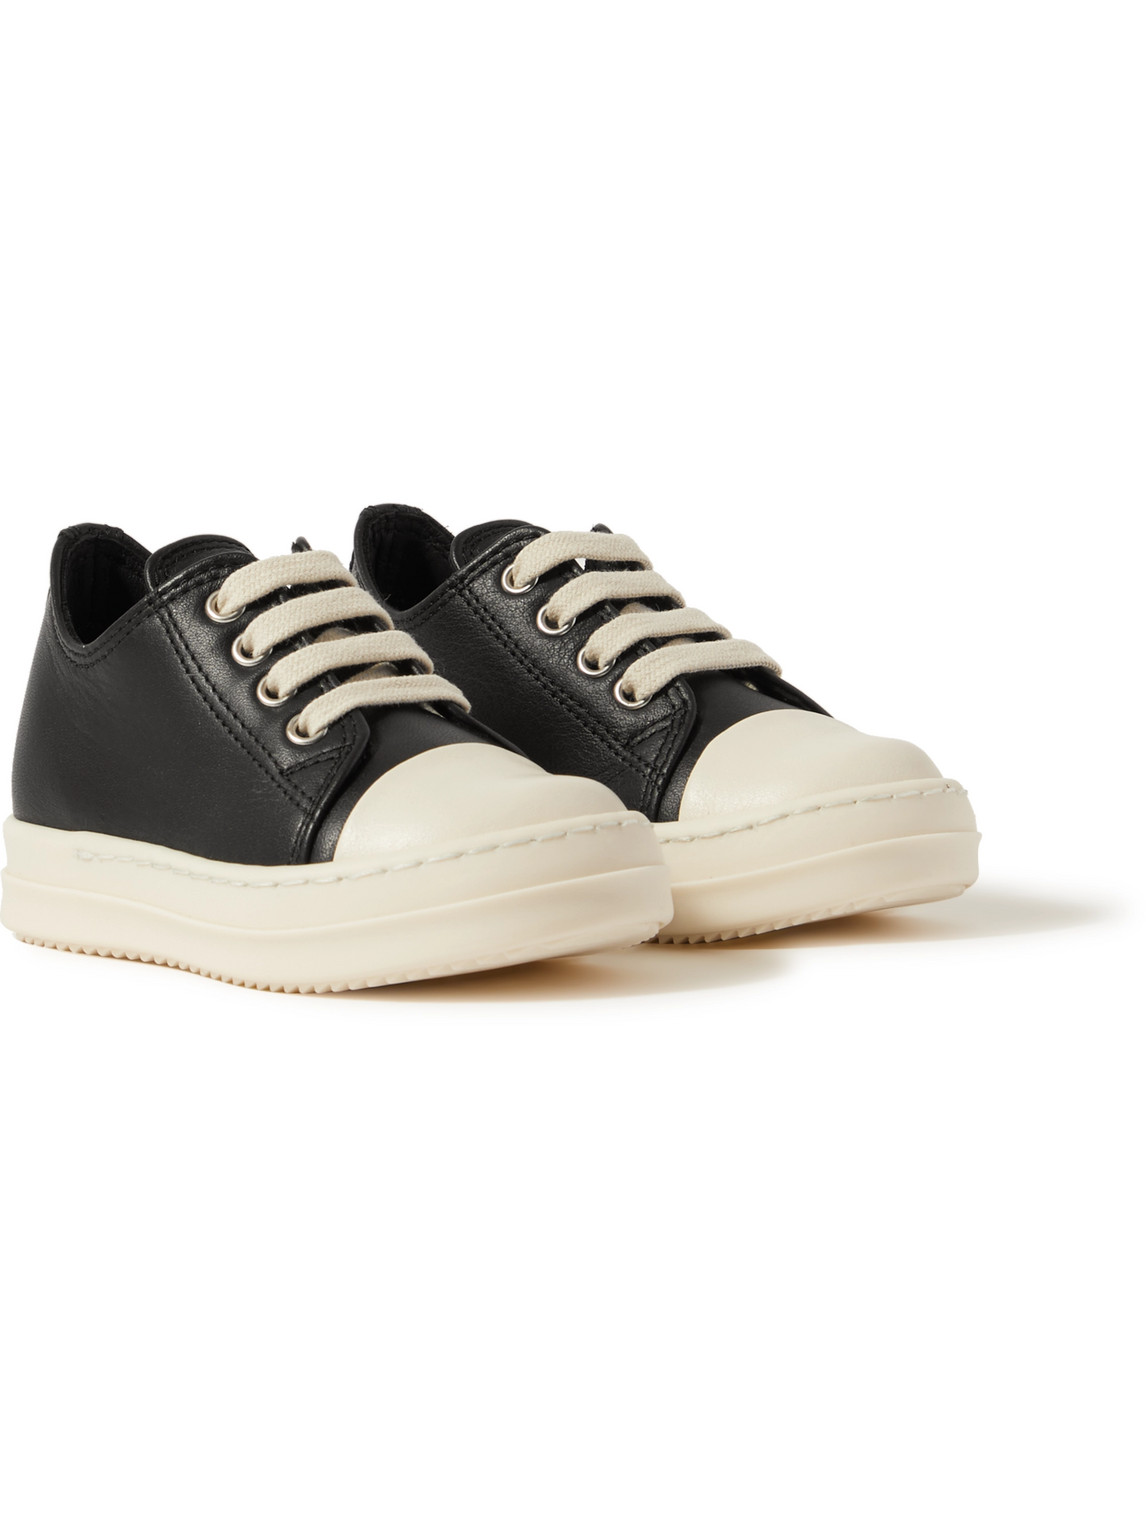 RICK OWENS BABY LEATHER SNEAKERS